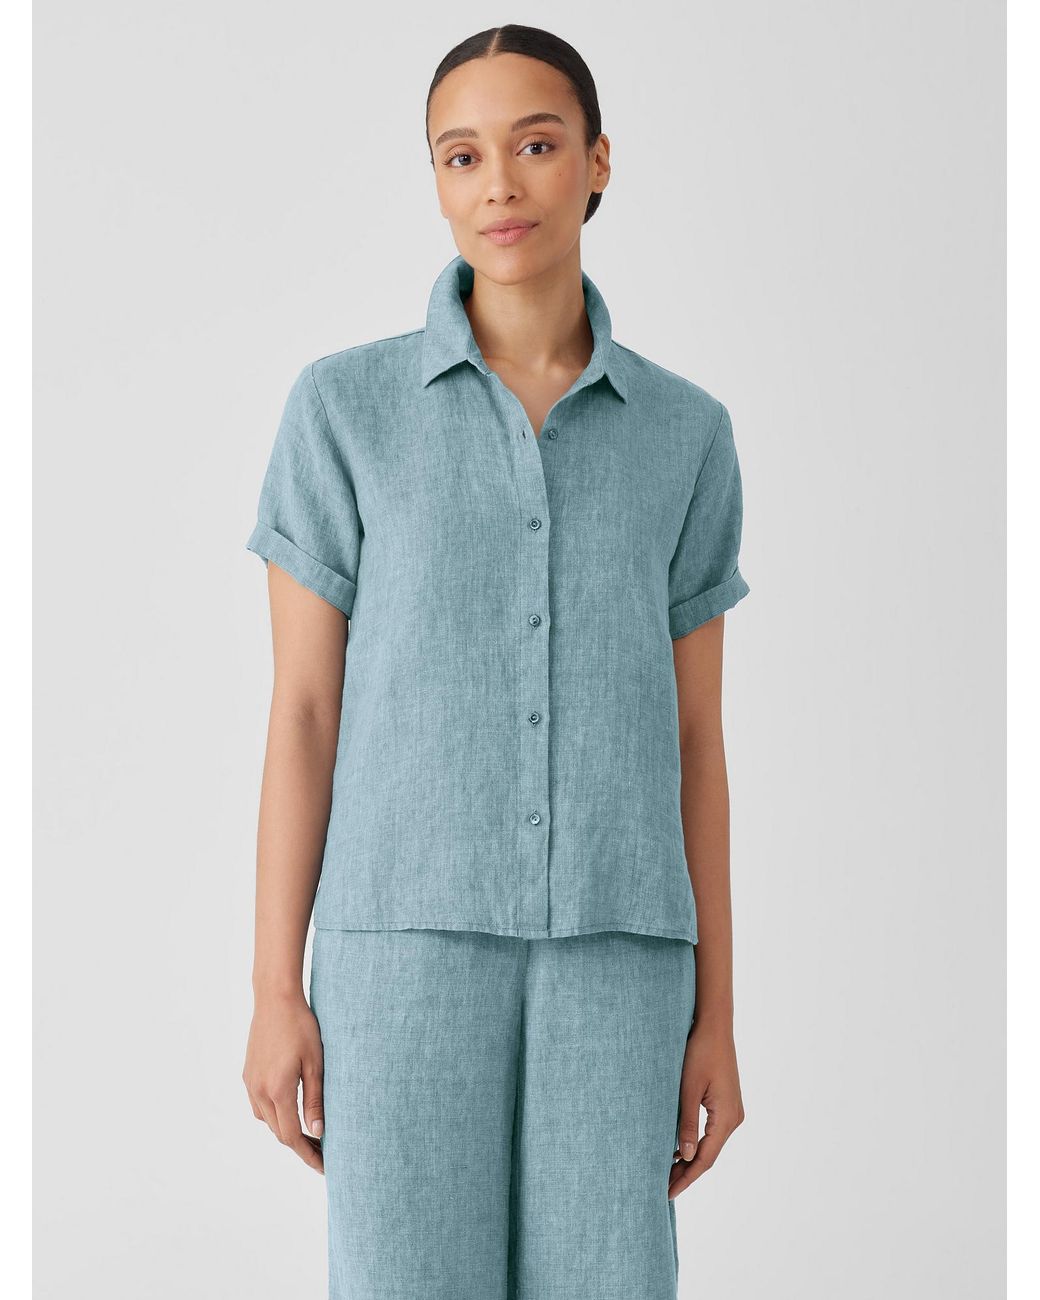 Eileen Fisher Washed Organic Linen Délavé Short-sleeve Shirt in Blue | Lyst